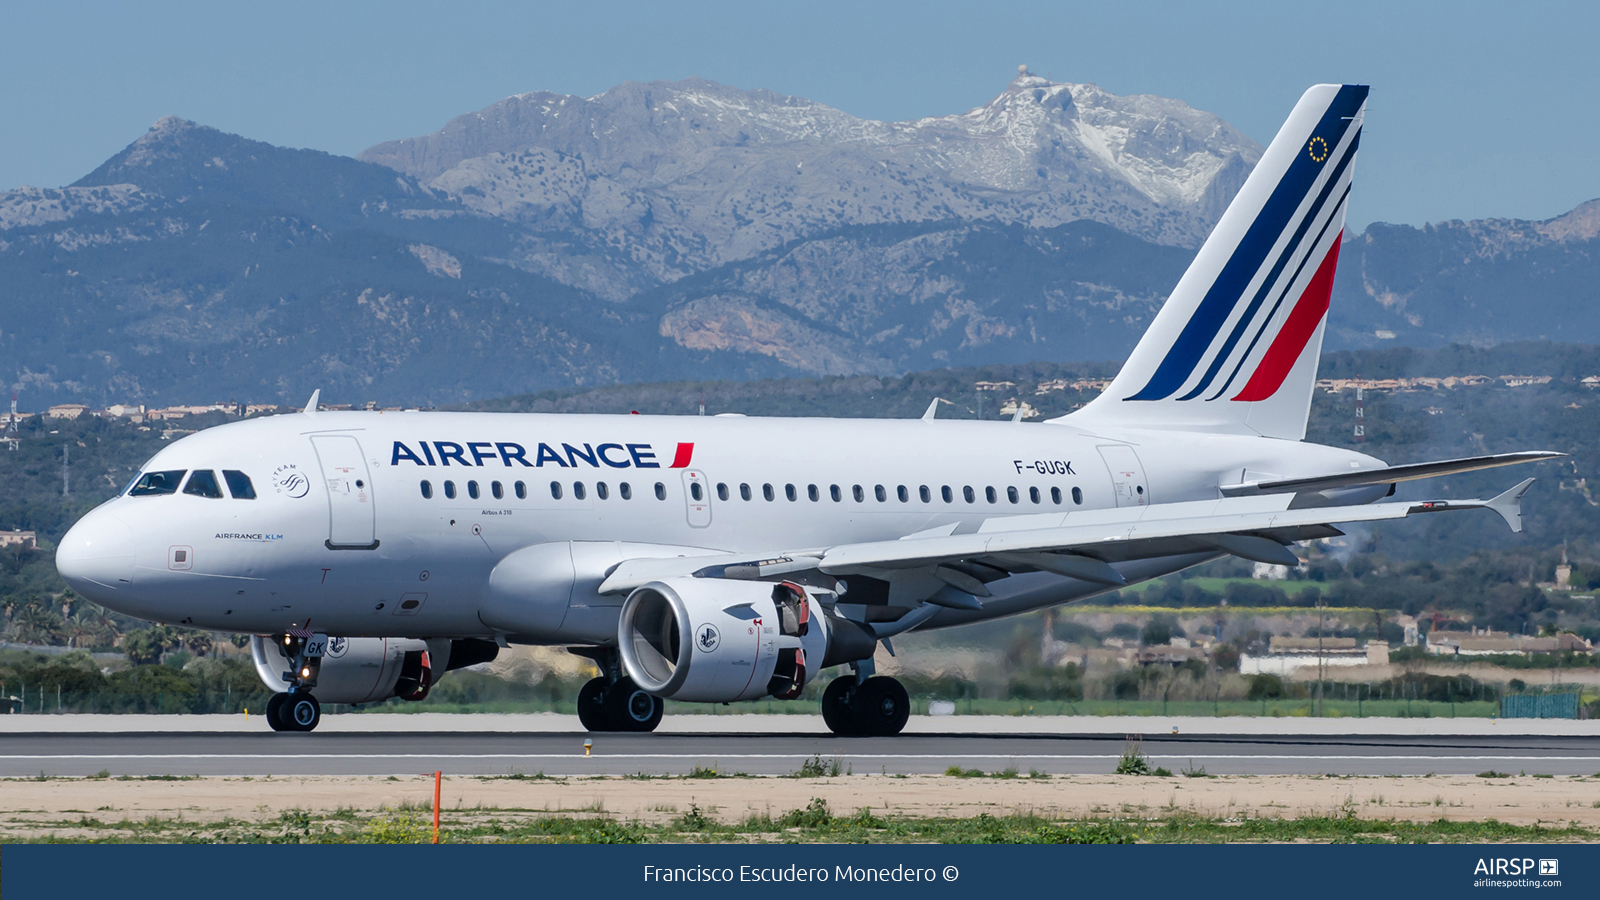 Air France  Airbus A318  F-GUGK